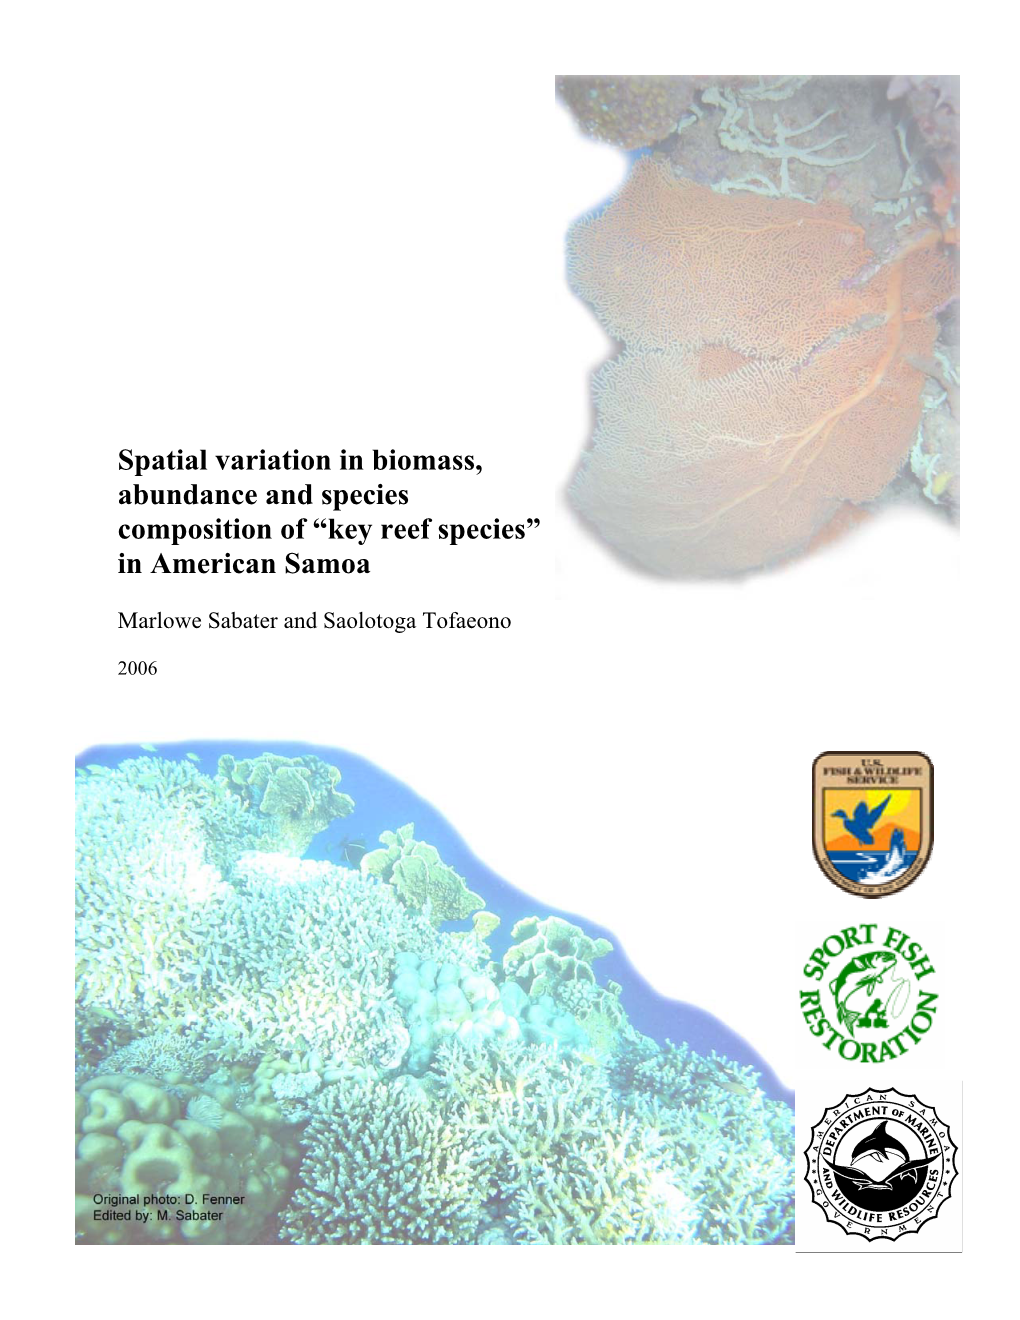 Spatial Variations in Biomass and Abundance of Key Reef Species in American Samoa